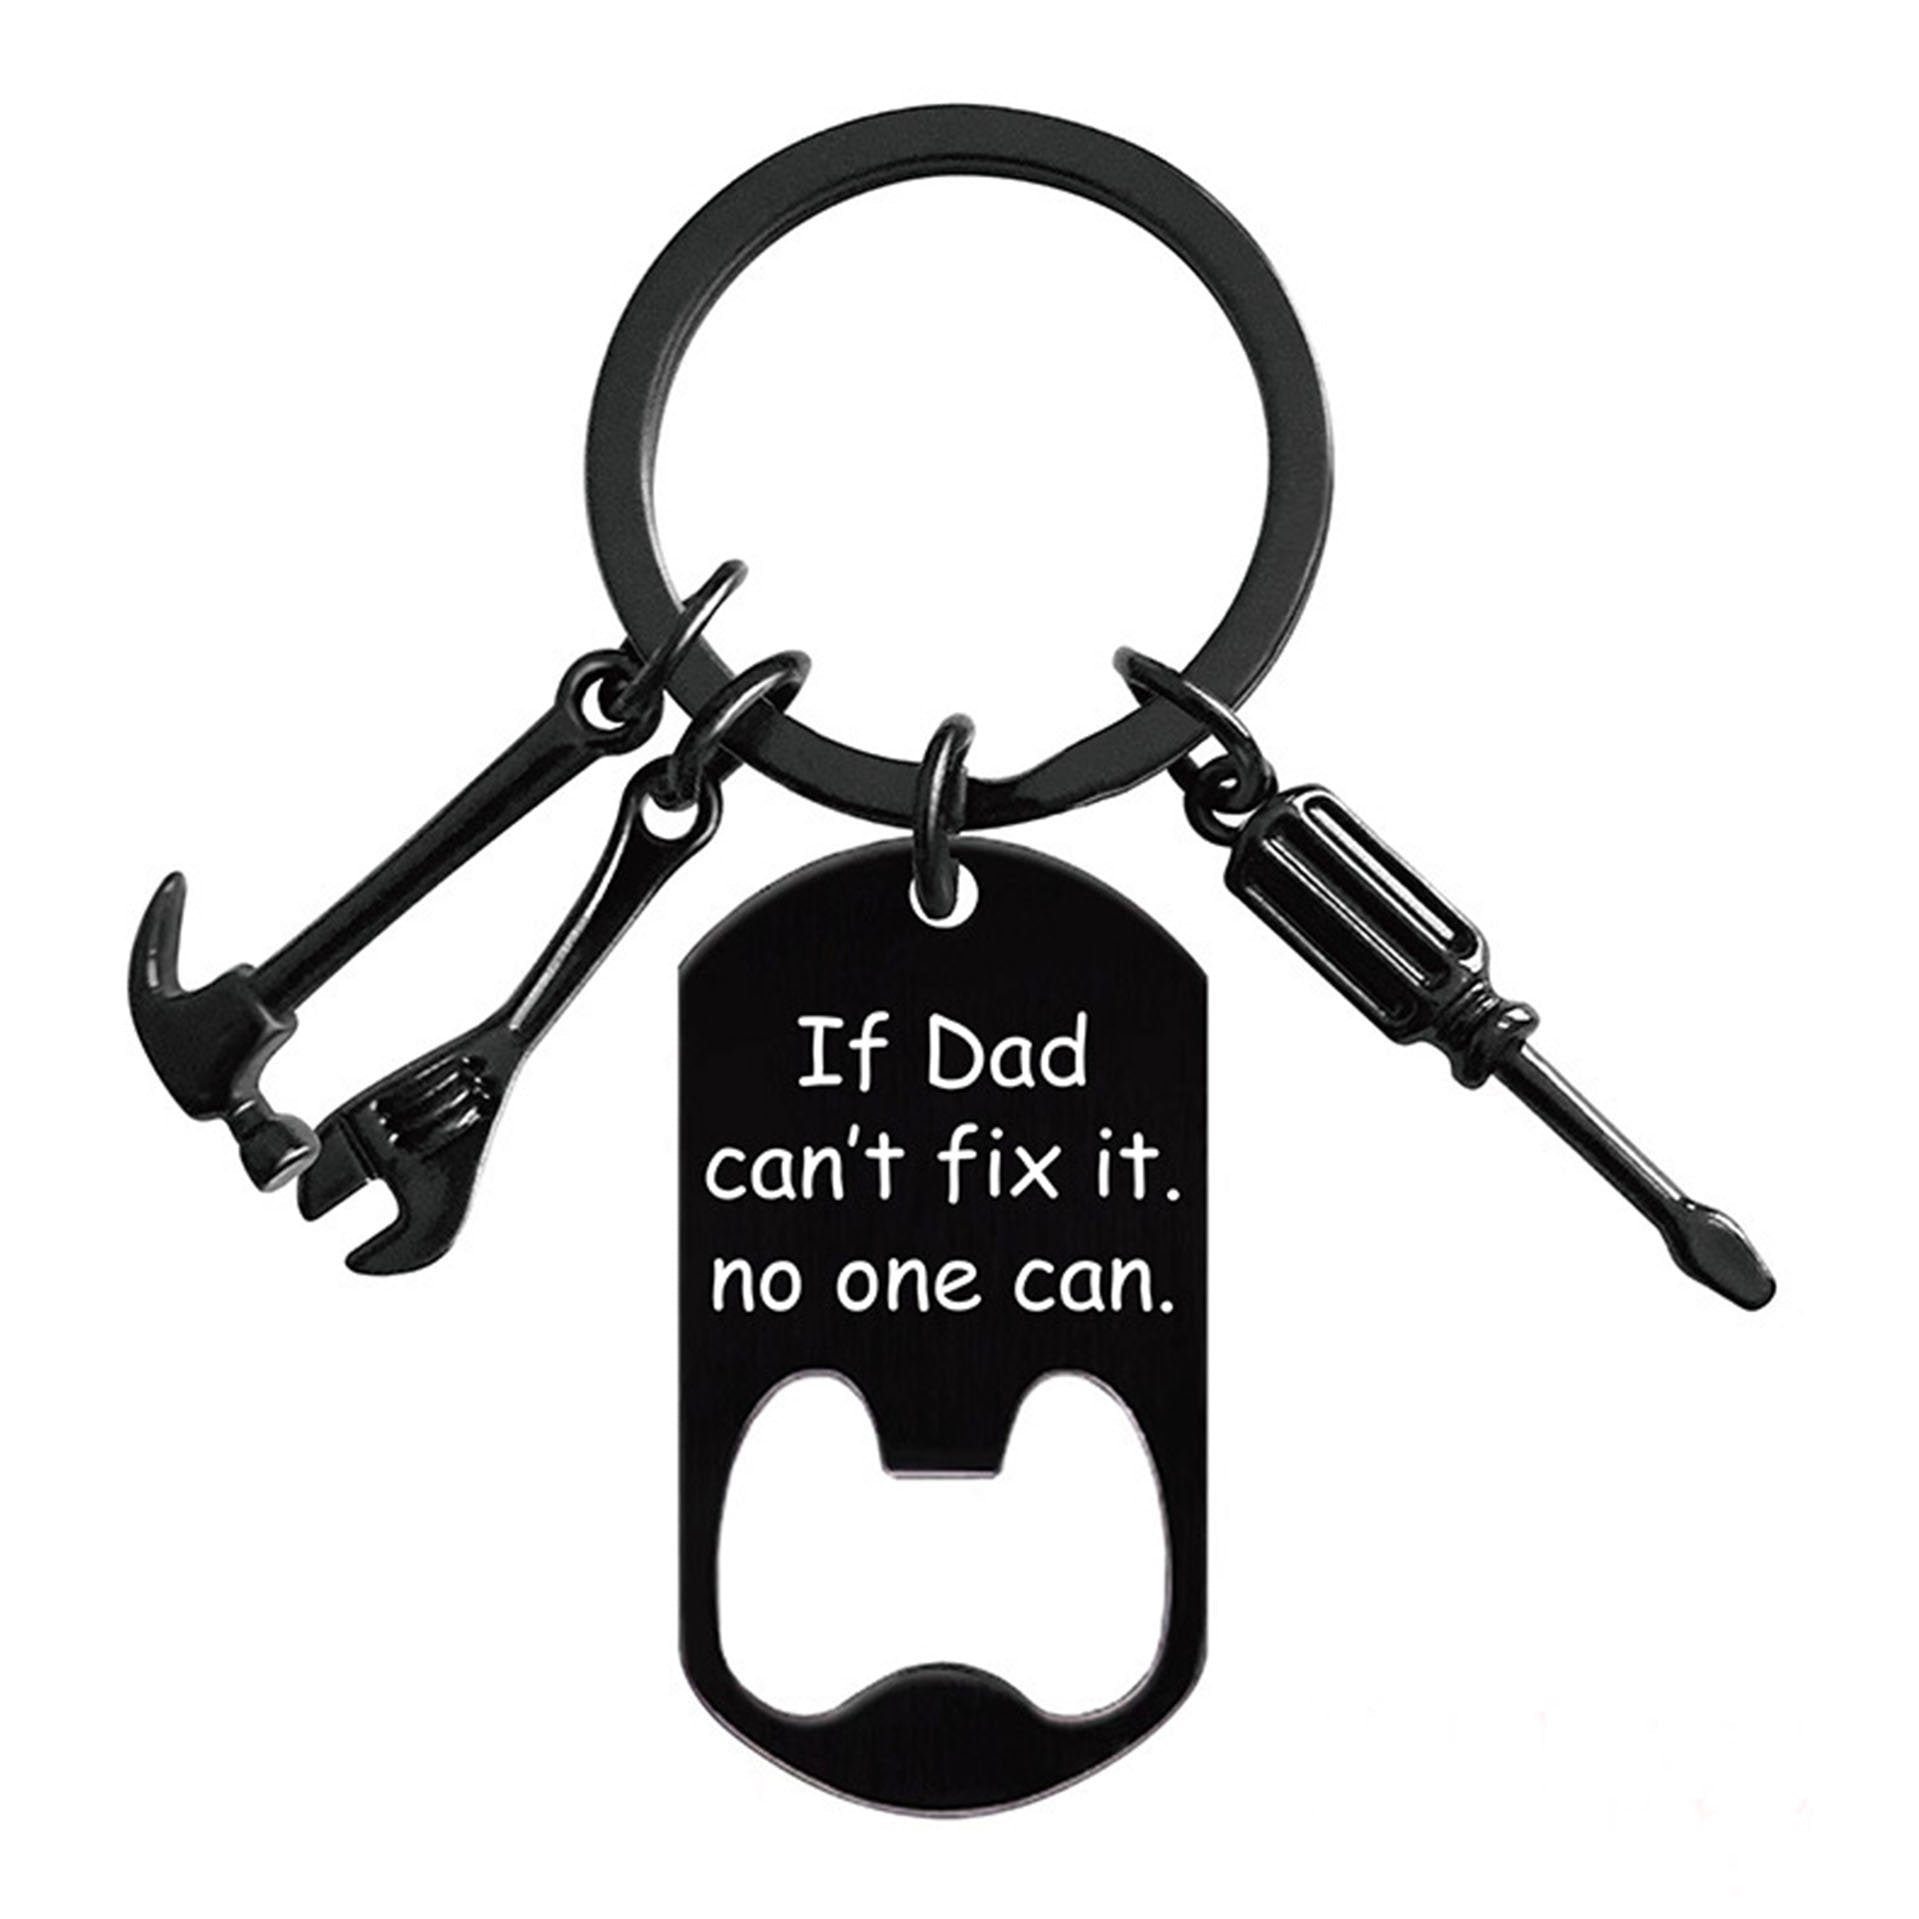 Stainless Steel Father's Day Gift Keychain Pendant